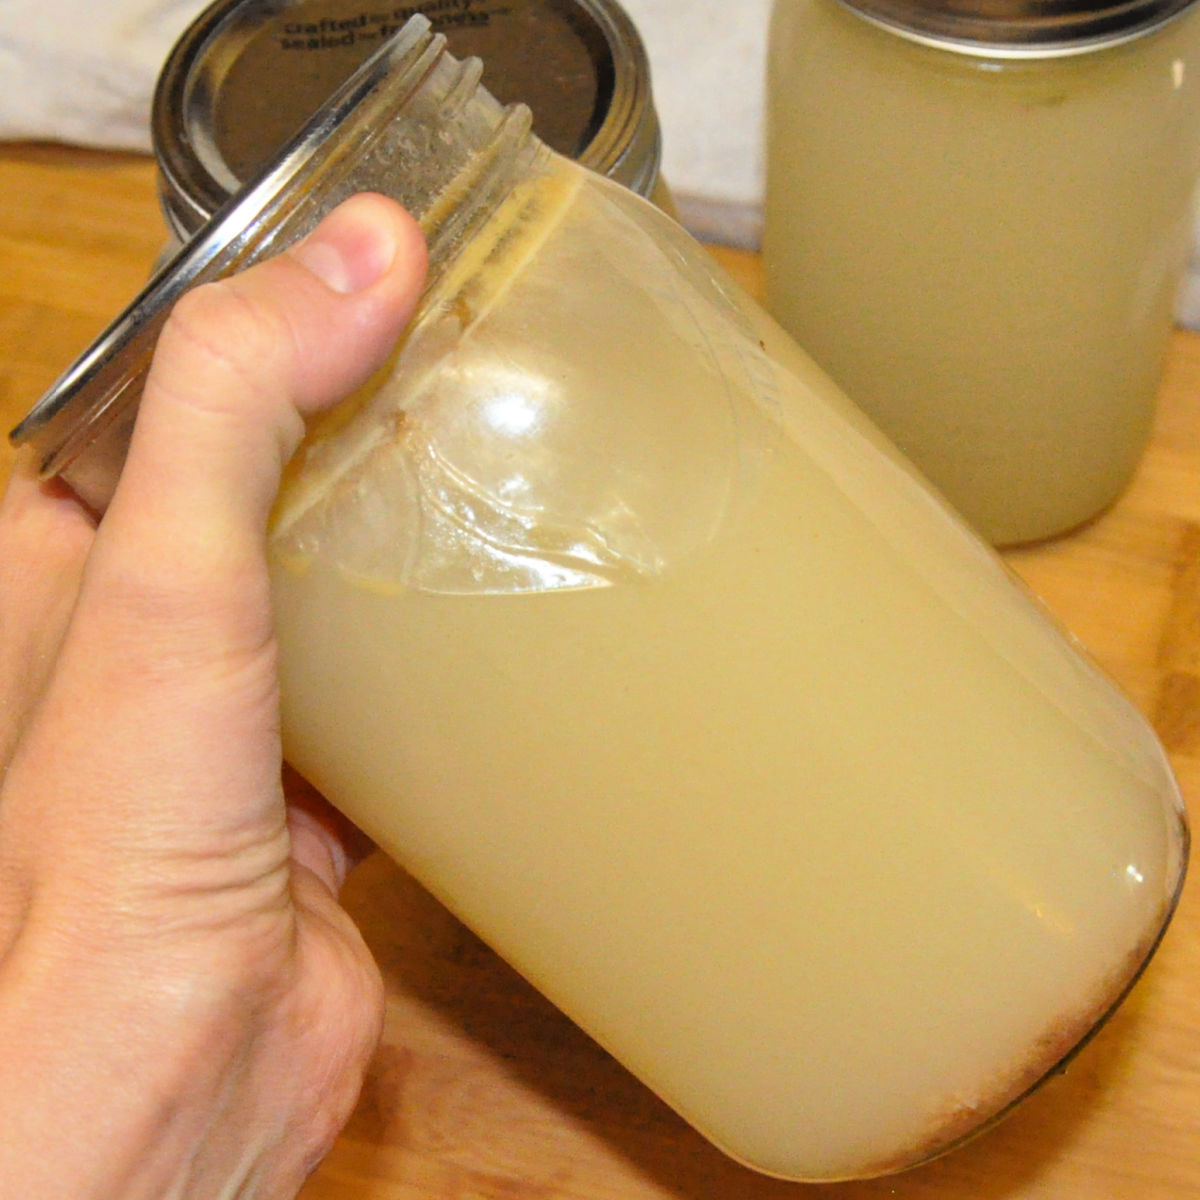 Jar of homemade chicken stock being tilted to show how thick it is.